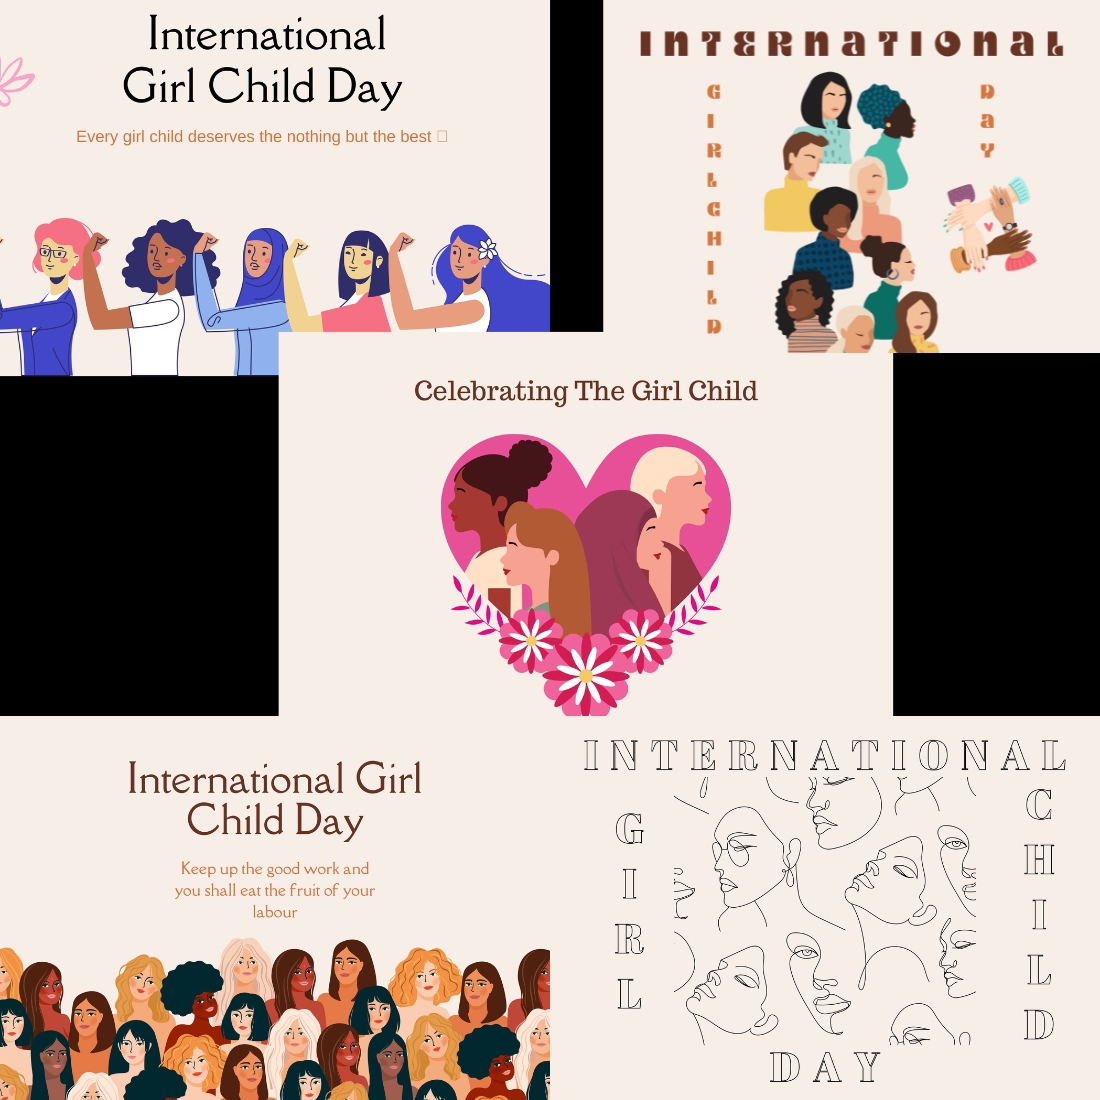 International Girl Child Day and Women's Cards cover image.